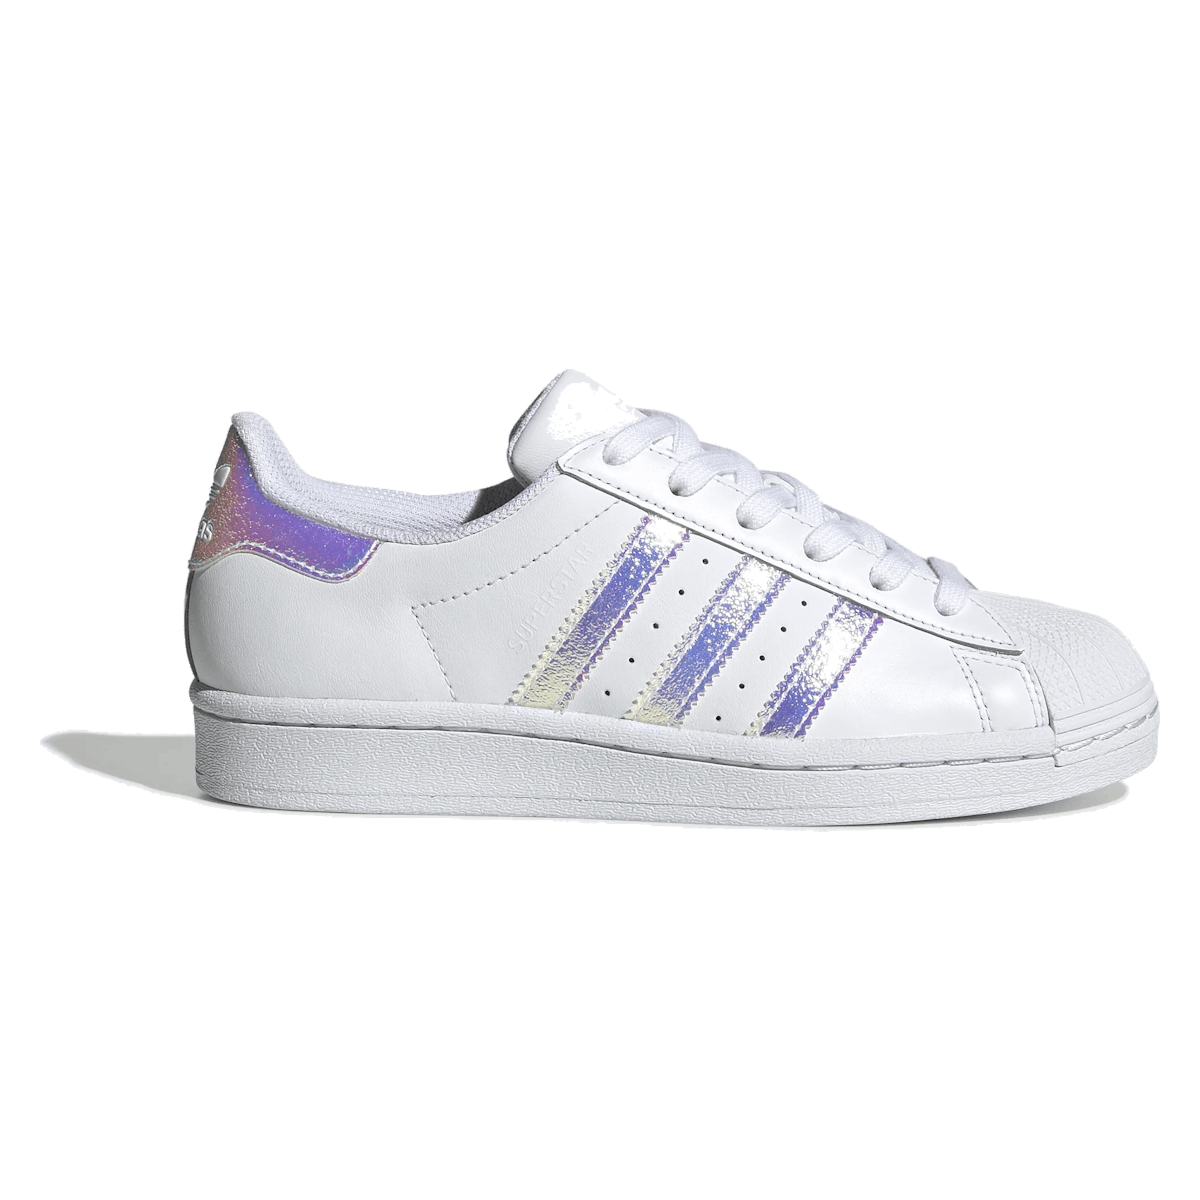 adidas Superstar Cloud White Iridescent (Youth)